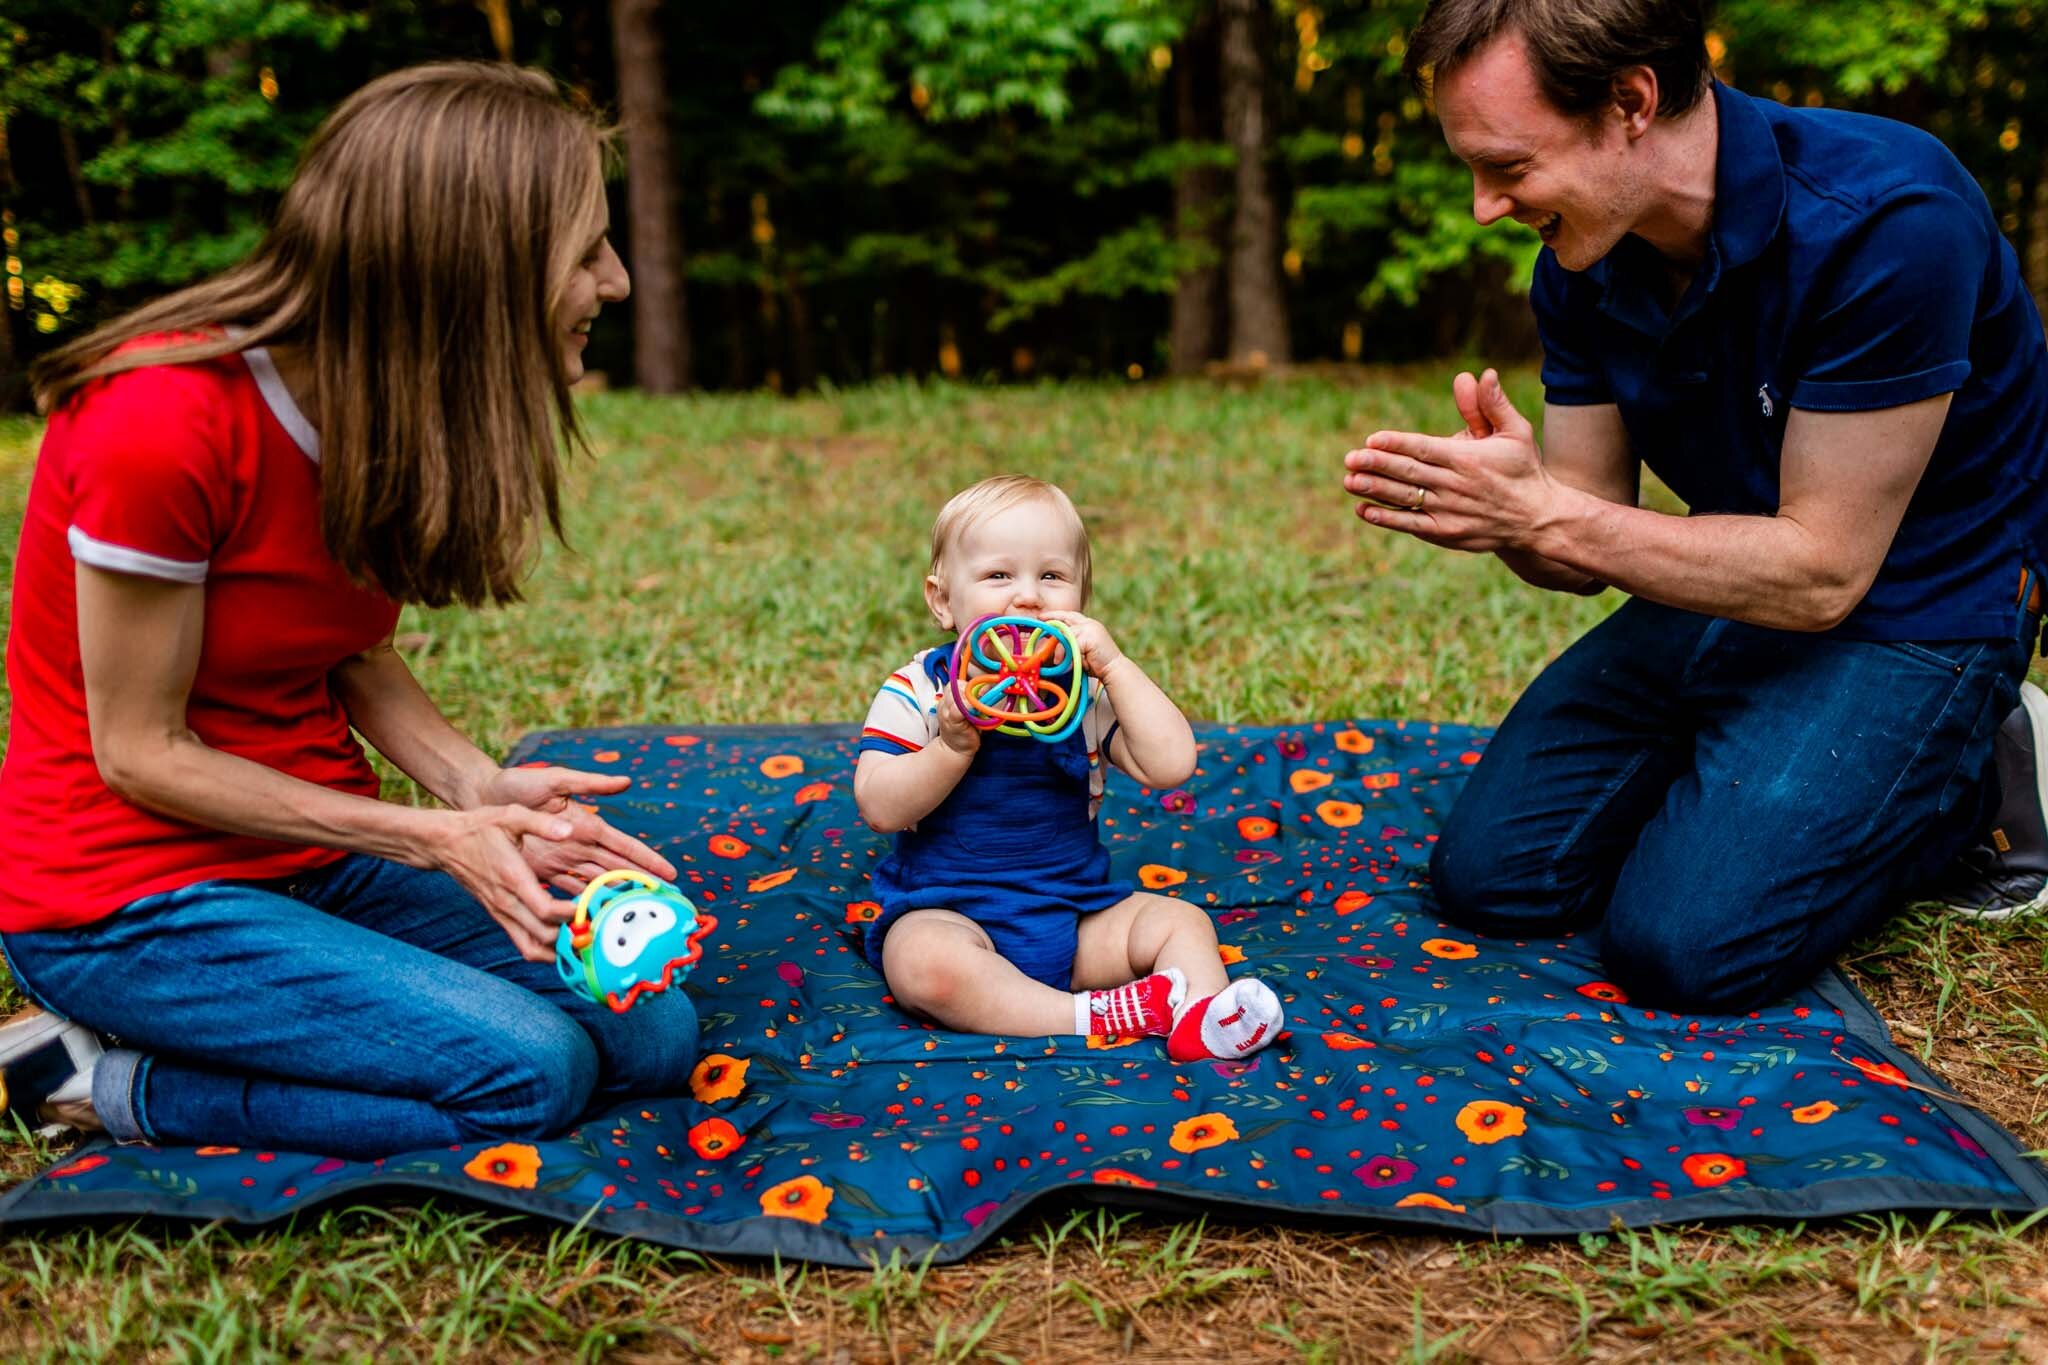 Raleigh Family Photographer | Umstead Park | By G. Lin Photography | Baby playing with toy